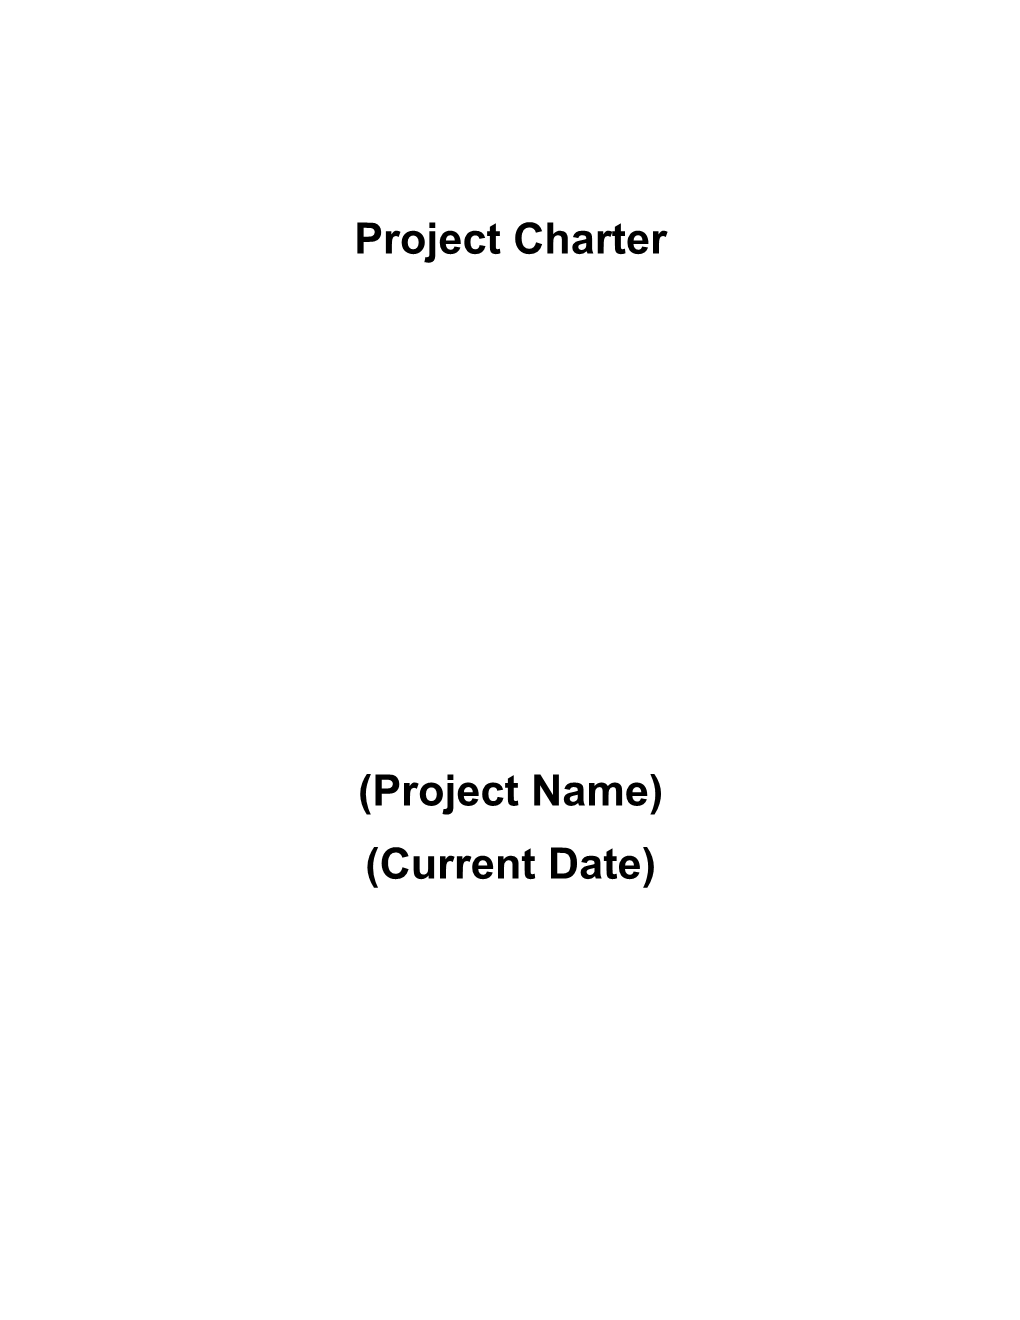 Project Charter - Large Projects